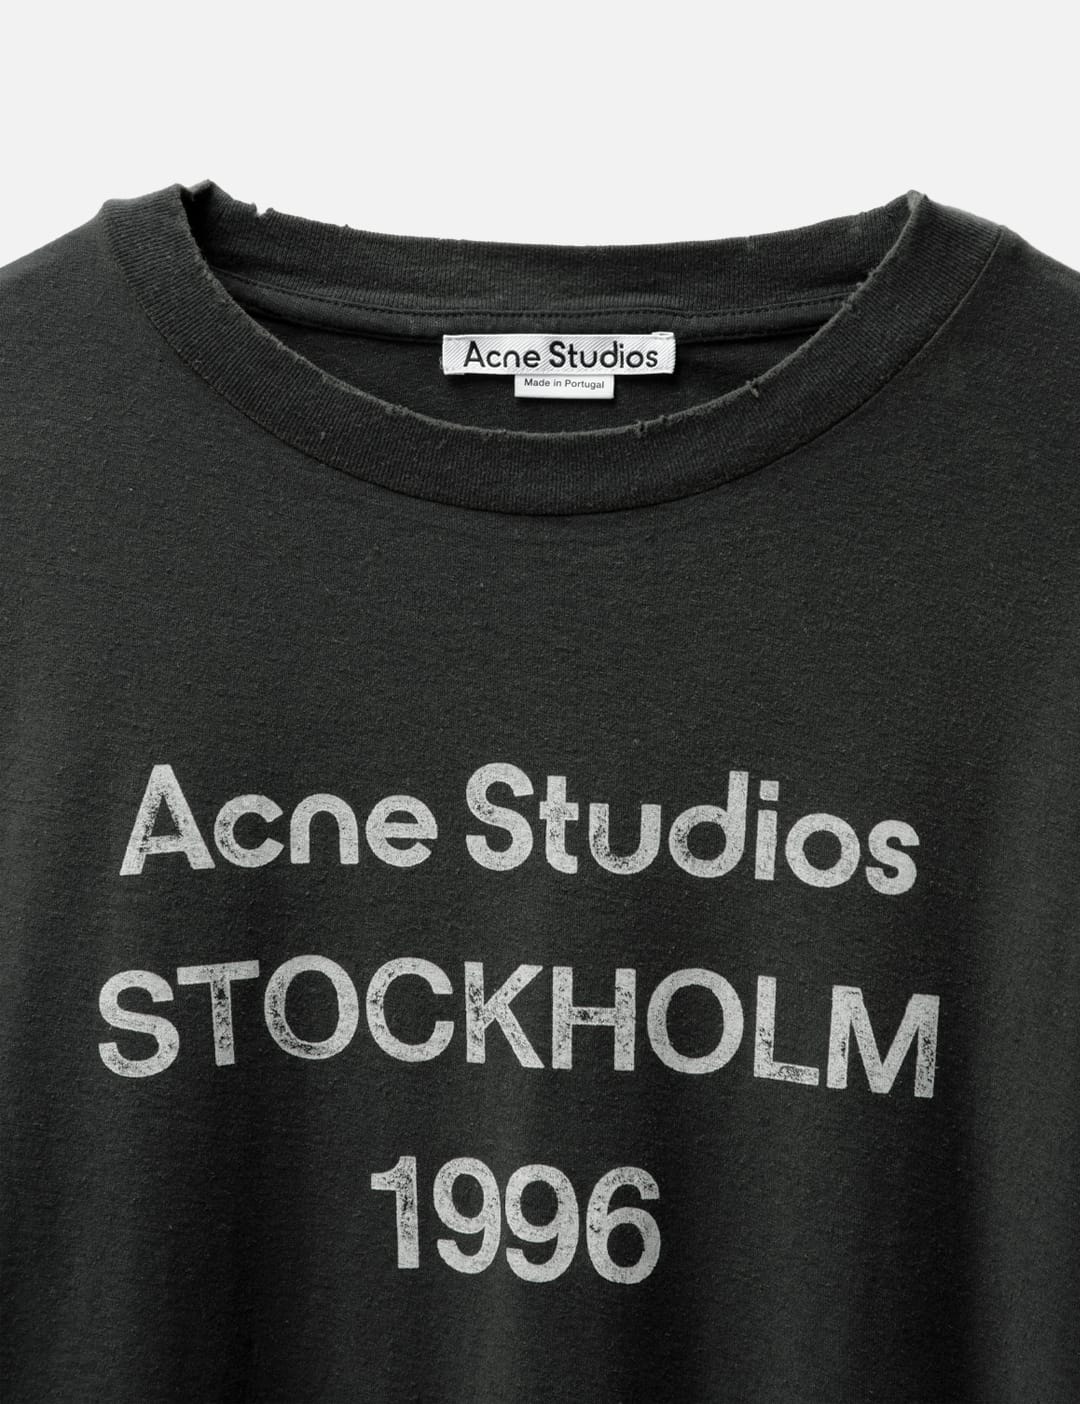 Acne Studios - Logo T-shirt | HBX - Globally Curated Fashion and